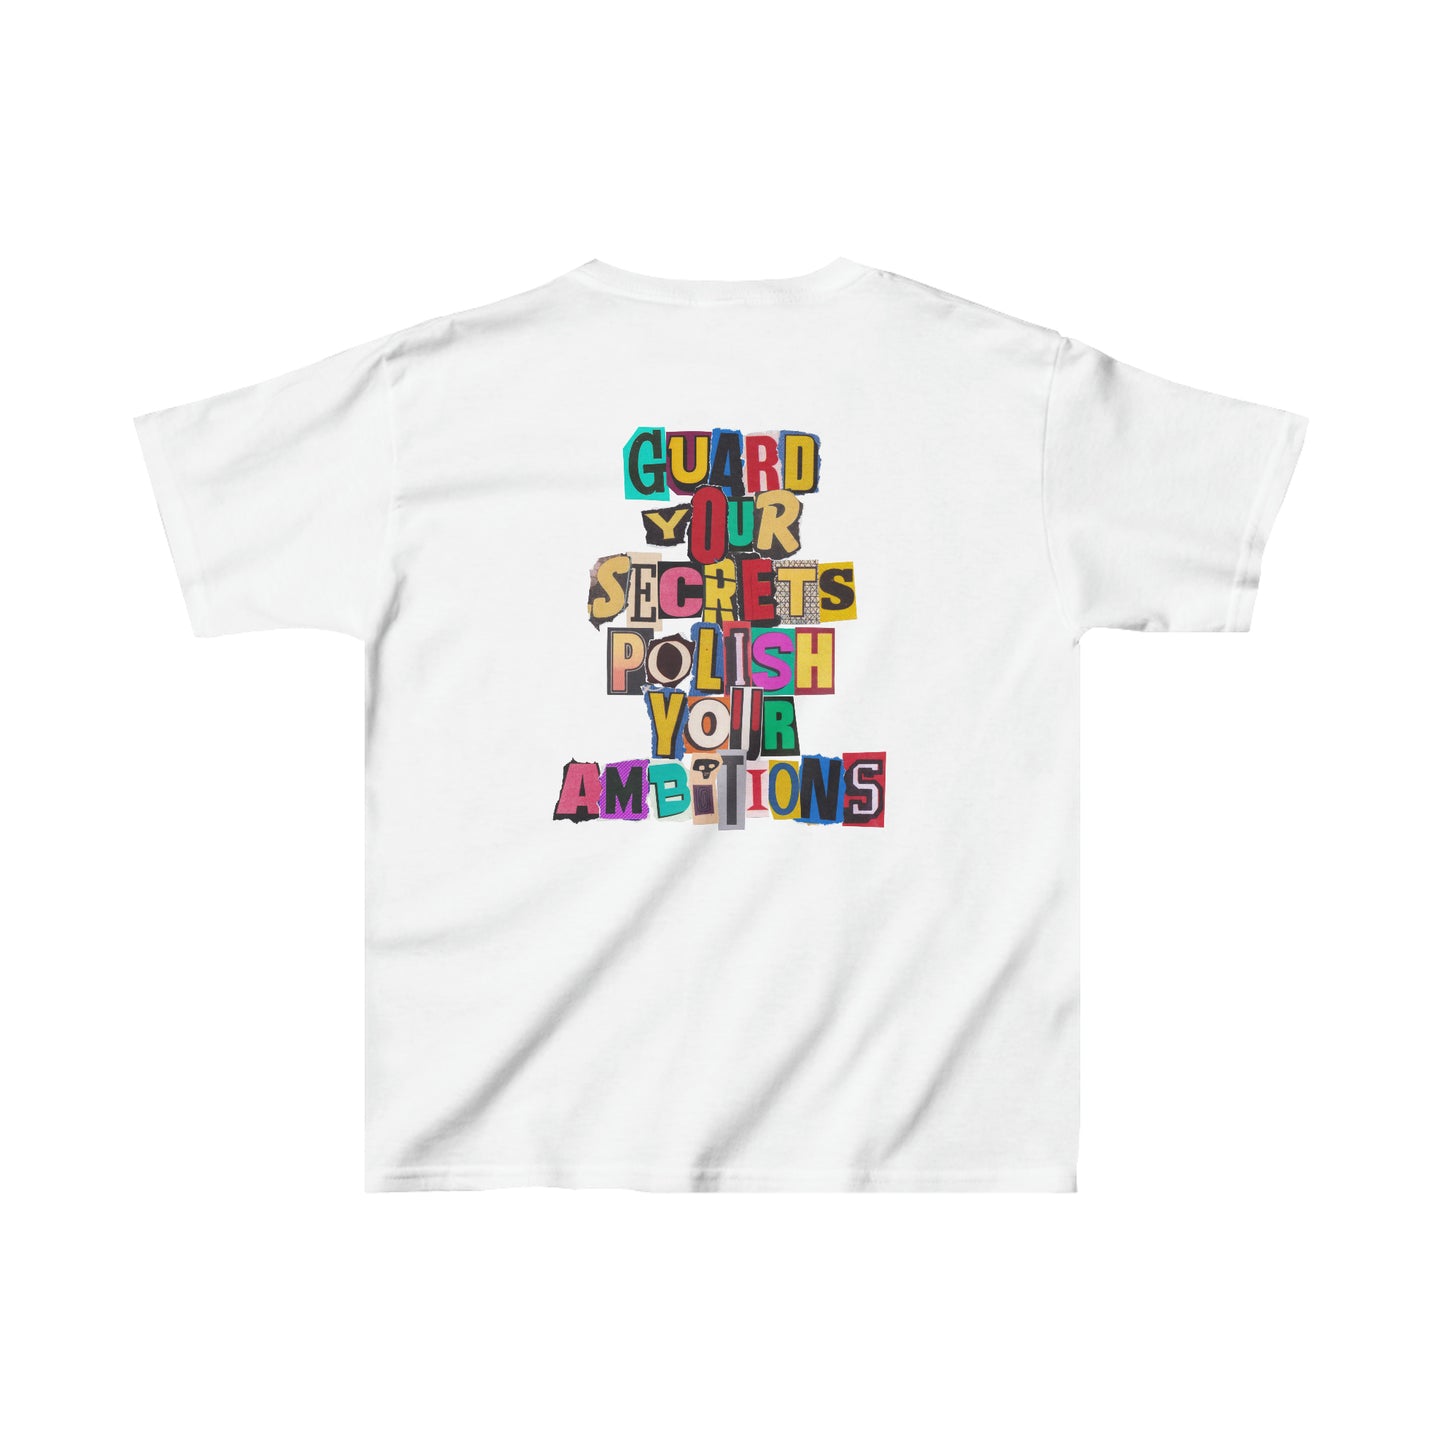 Youth WIY x Kelce Vintage T-Shirt